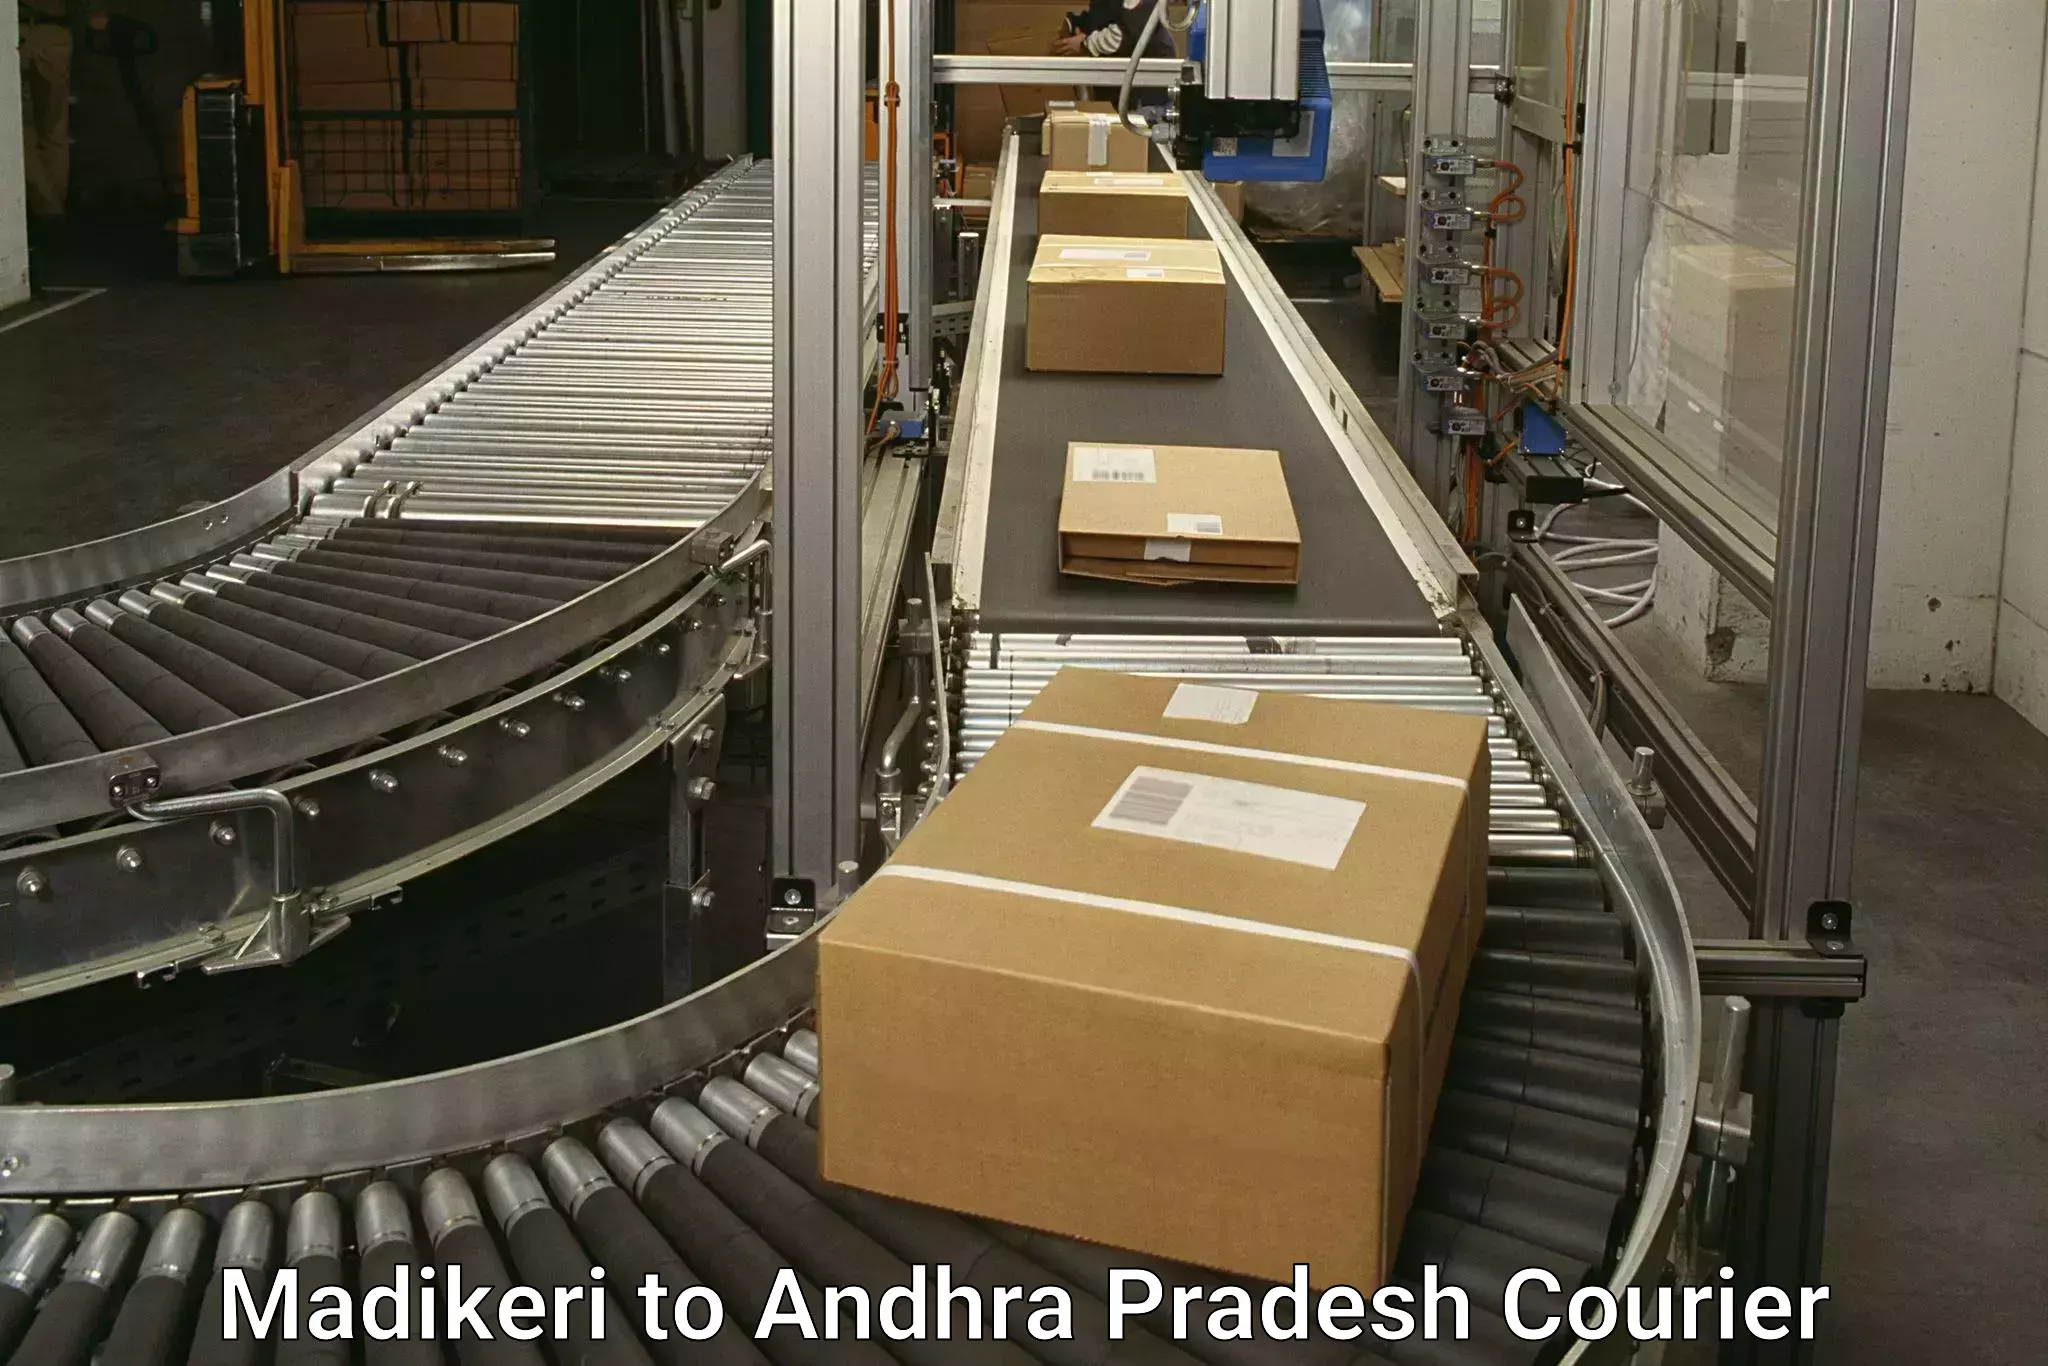 Automated parcel services Madikeri to Bantumilli